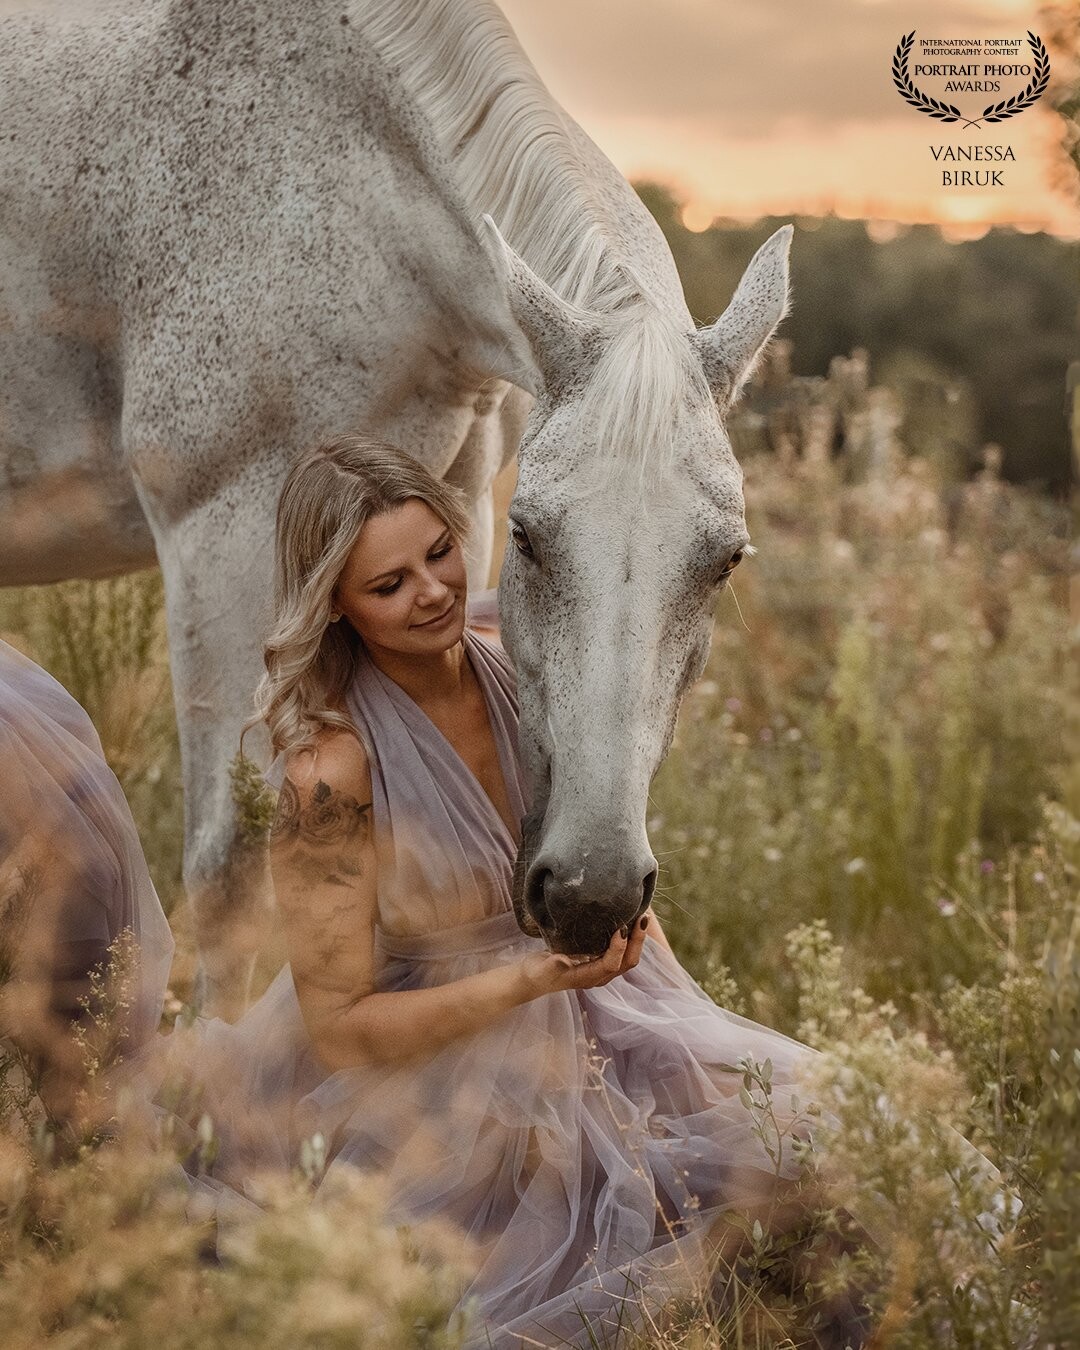 You don't meet a horse by chance.<br />
Either it is a task for you, a chance or the great love.<br />
It is not uncommon for all three points to apply to a horse. And that is a real gift.<br />
<br />
Model @kristina.chiara<br />
Photo & Edit @vanessa_biruk<br />
Dress @kh.fashionhouse